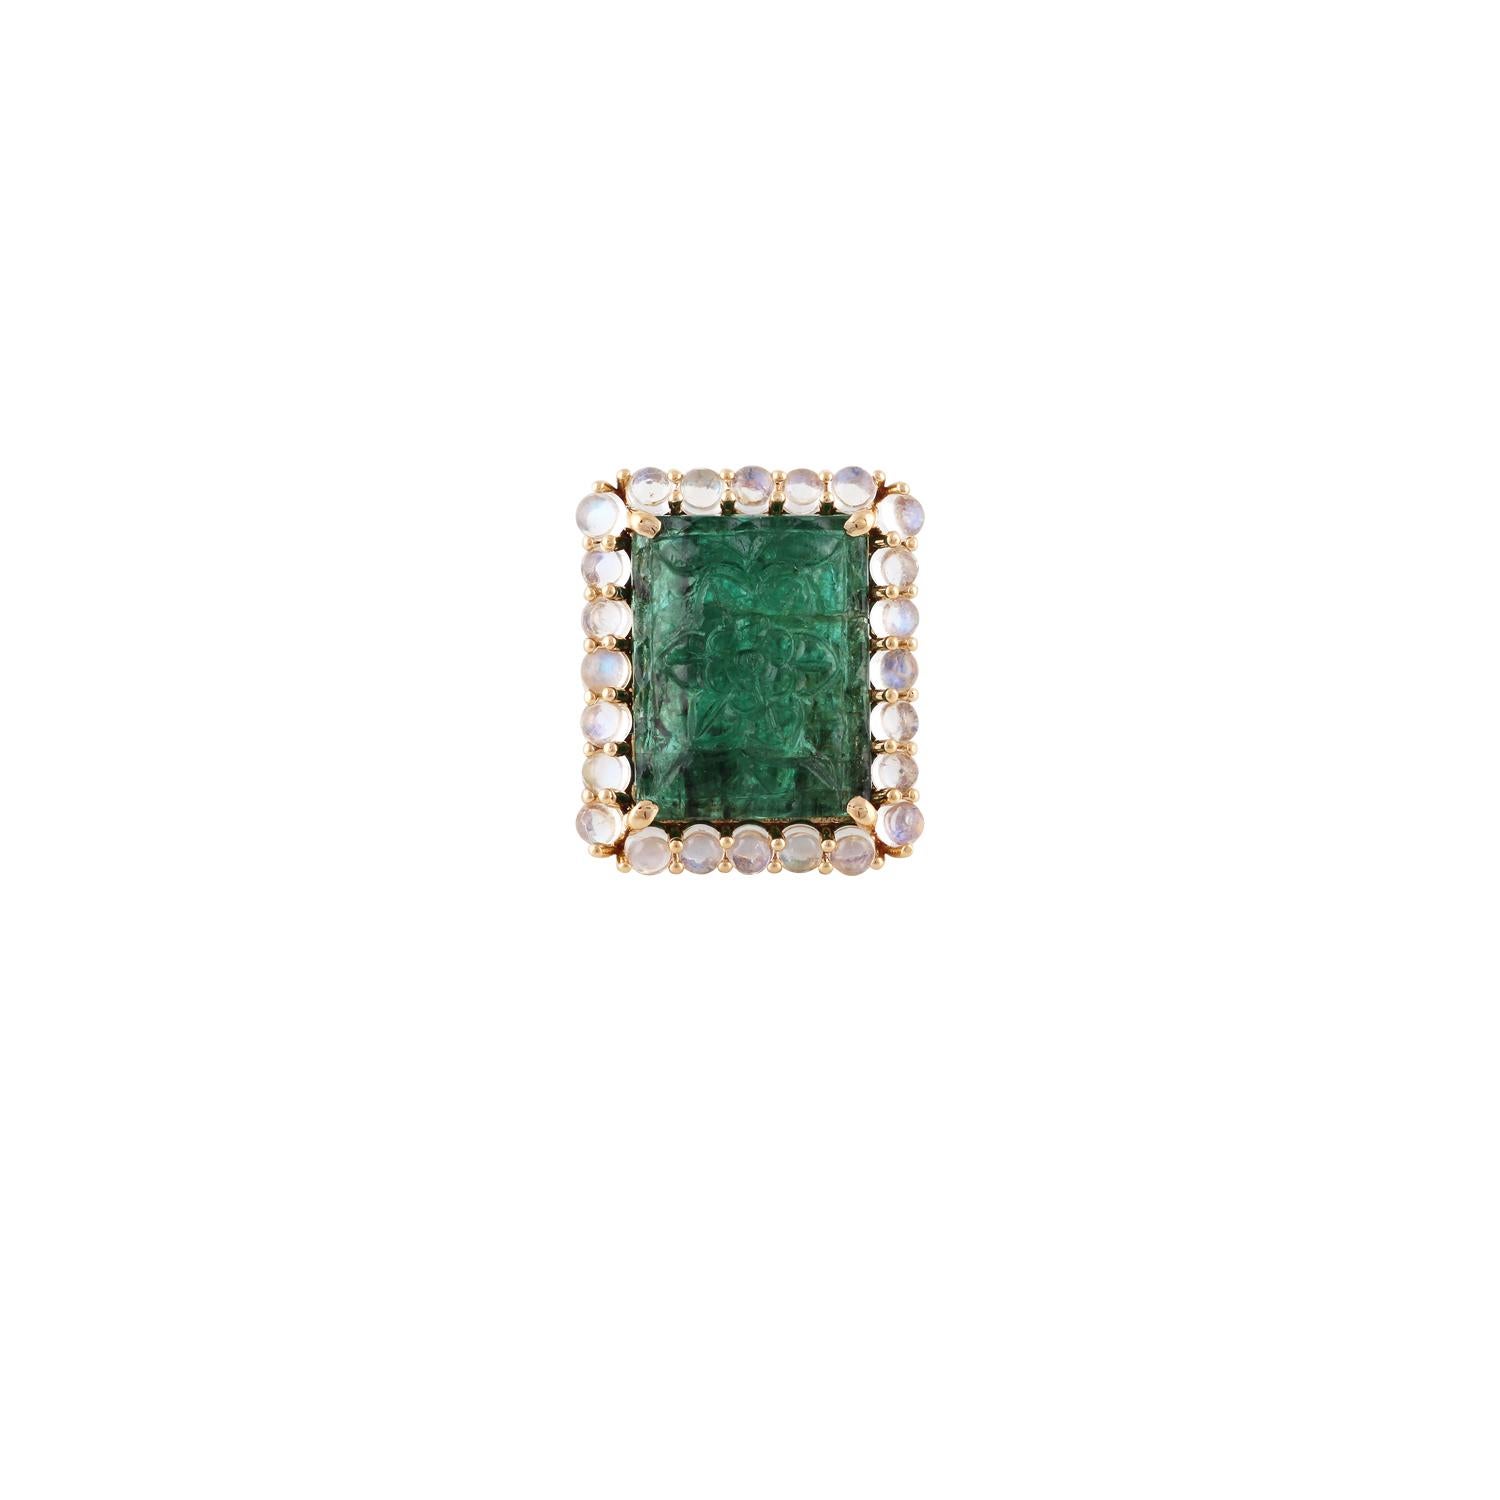 This is an elegant carved emerald & moon stone cocktail ring studded in 18k yellow gold features 1 piece of fine quality carved emerald weight 14.31 carat with 24 pieces of cabochon shaped moon stones weight 3.21 carat, on the emerald there is fine